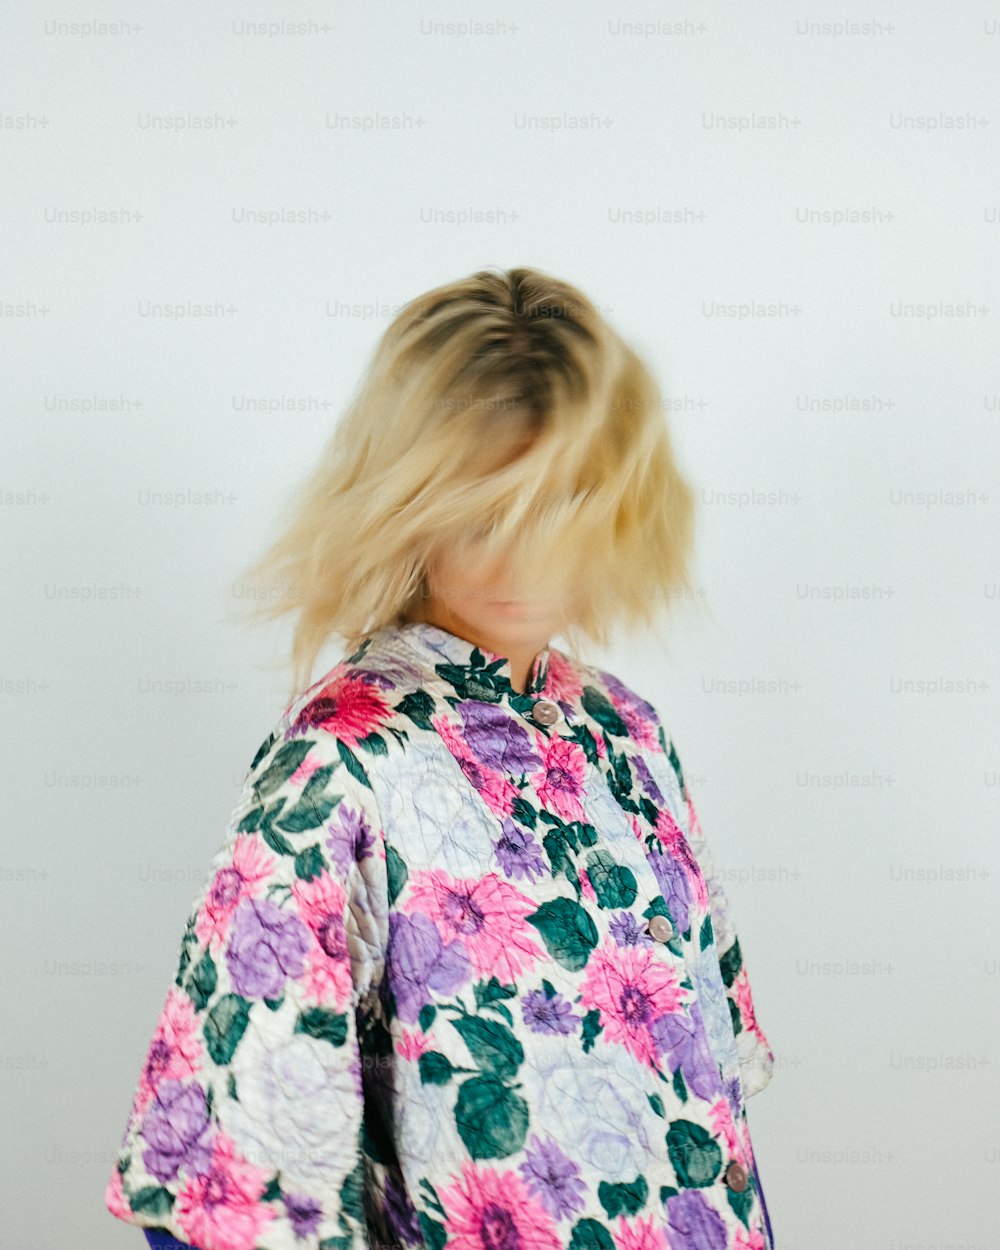 a woman with blonde hair wearing a floral shirt